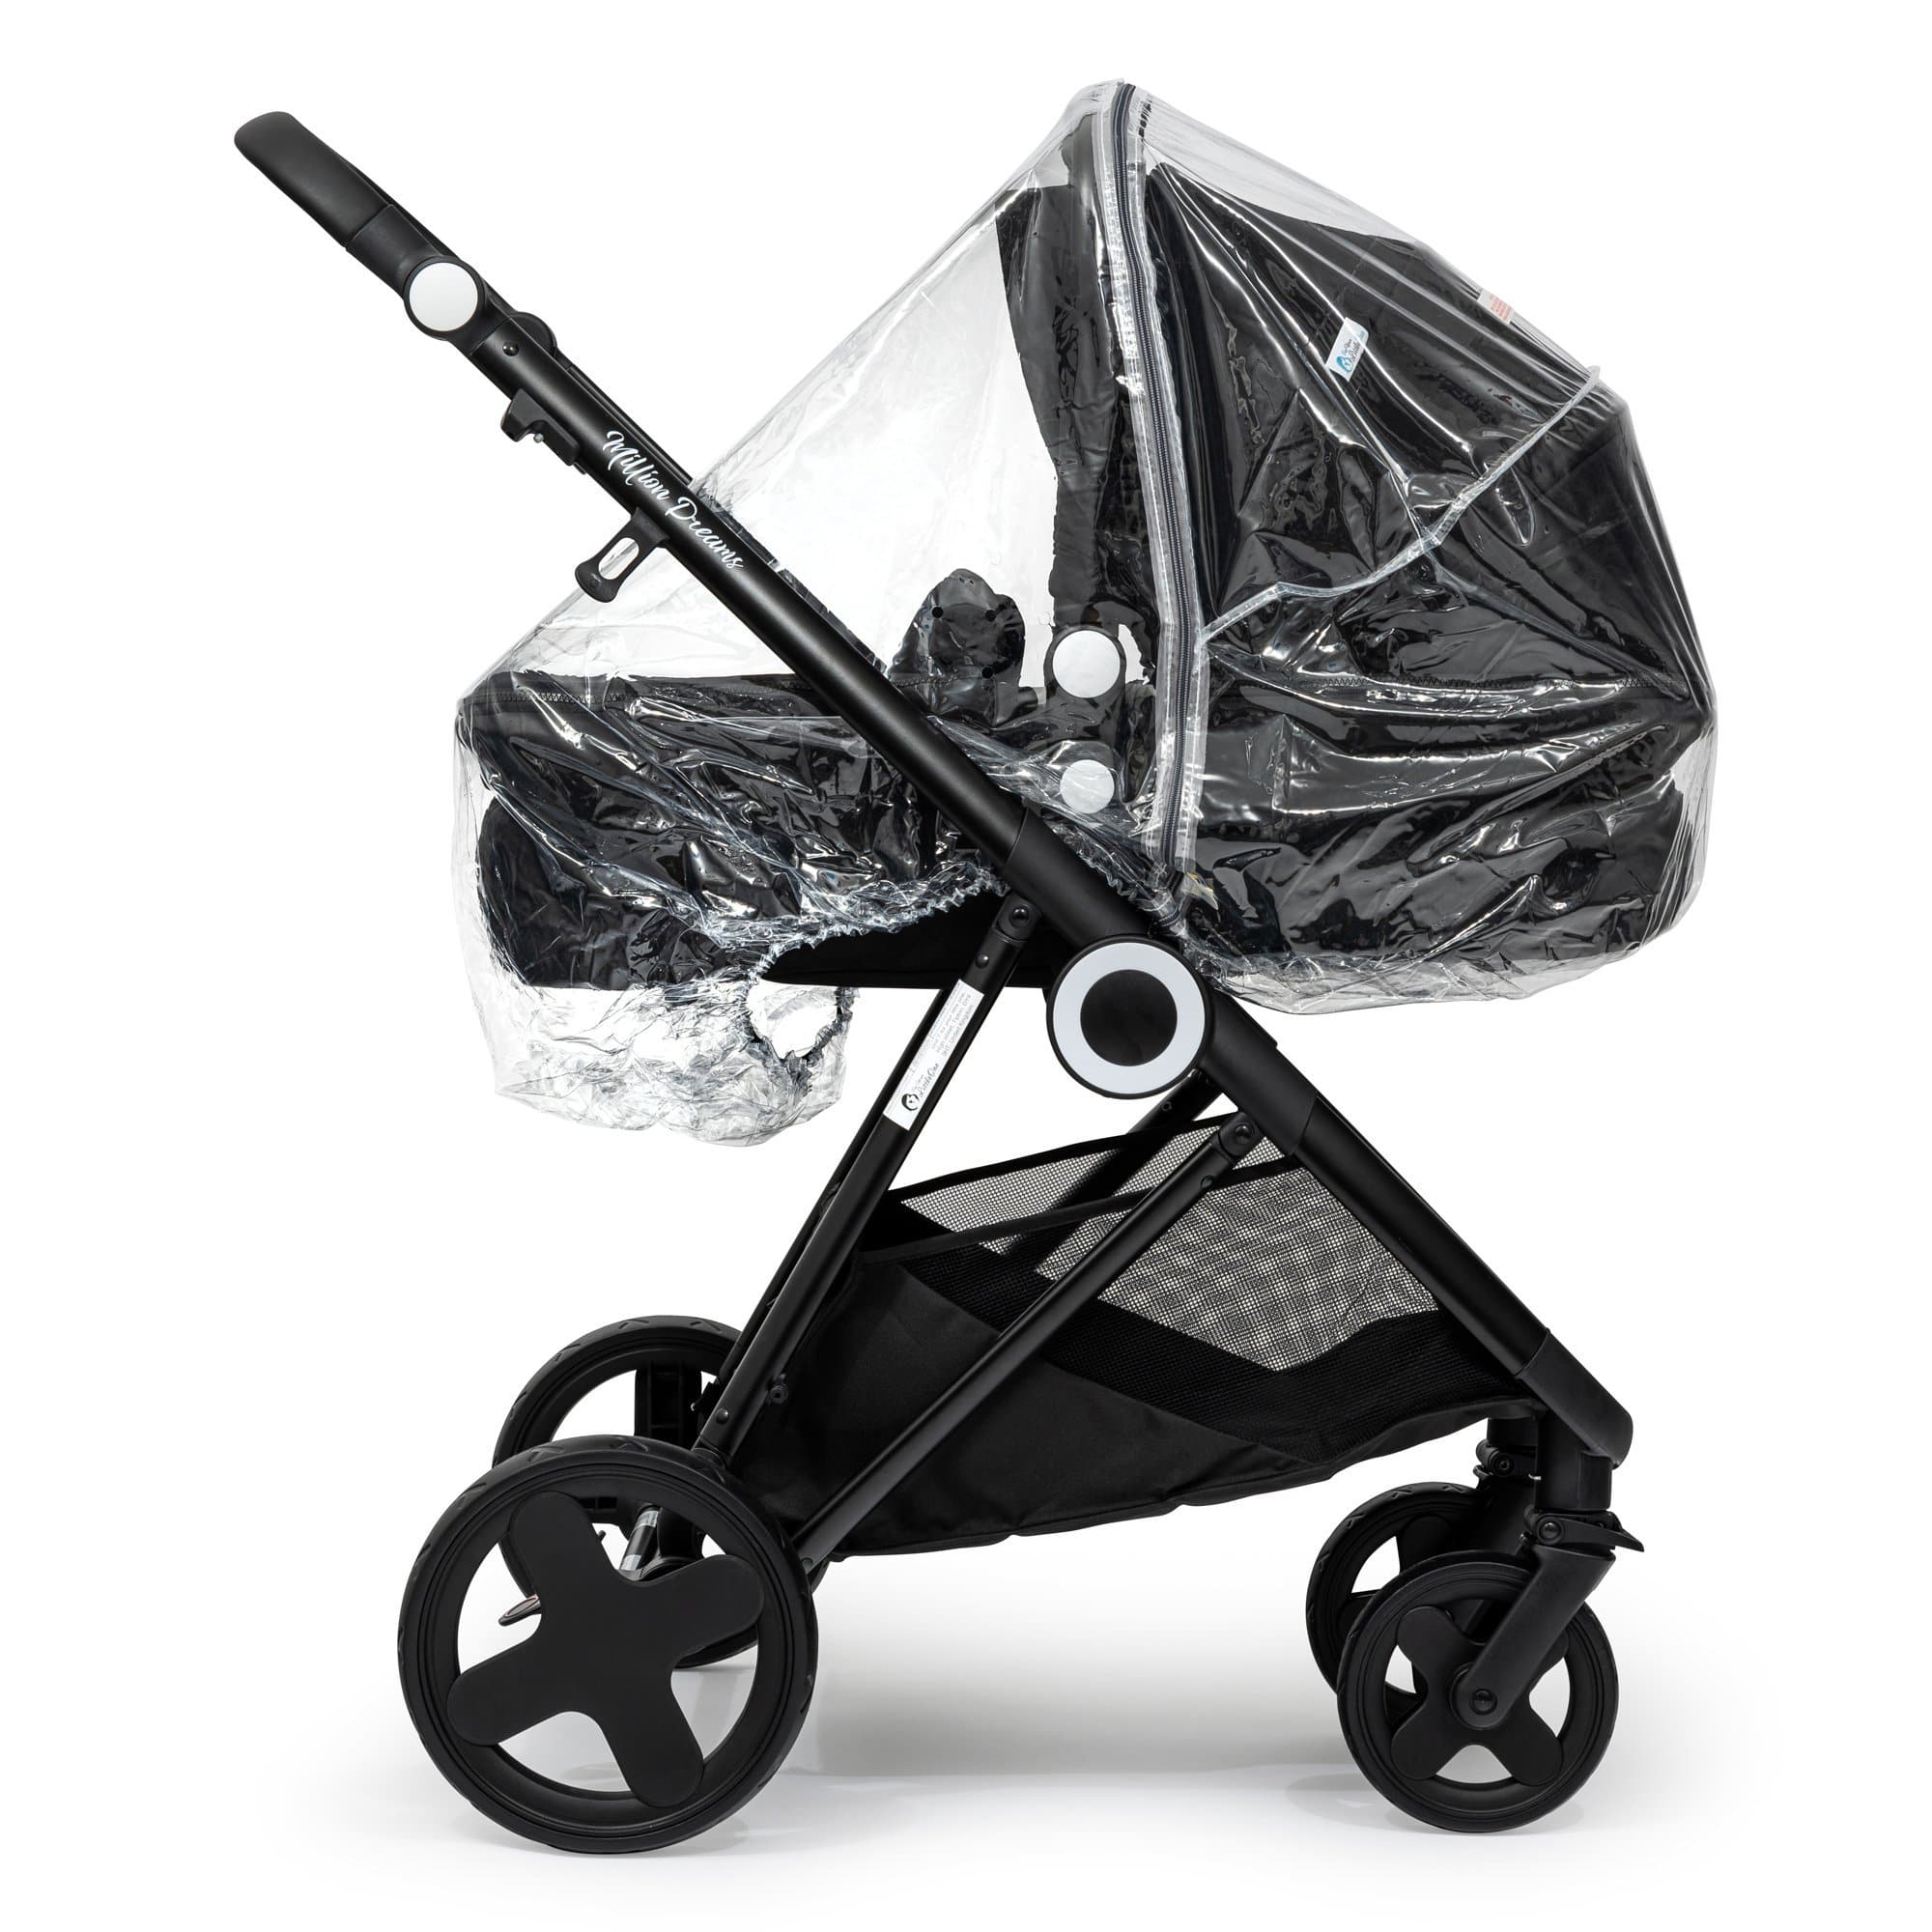 2 in 1 Rain Cover Compatible with Phil & Teds - Fits All Models -  | For Your Little One